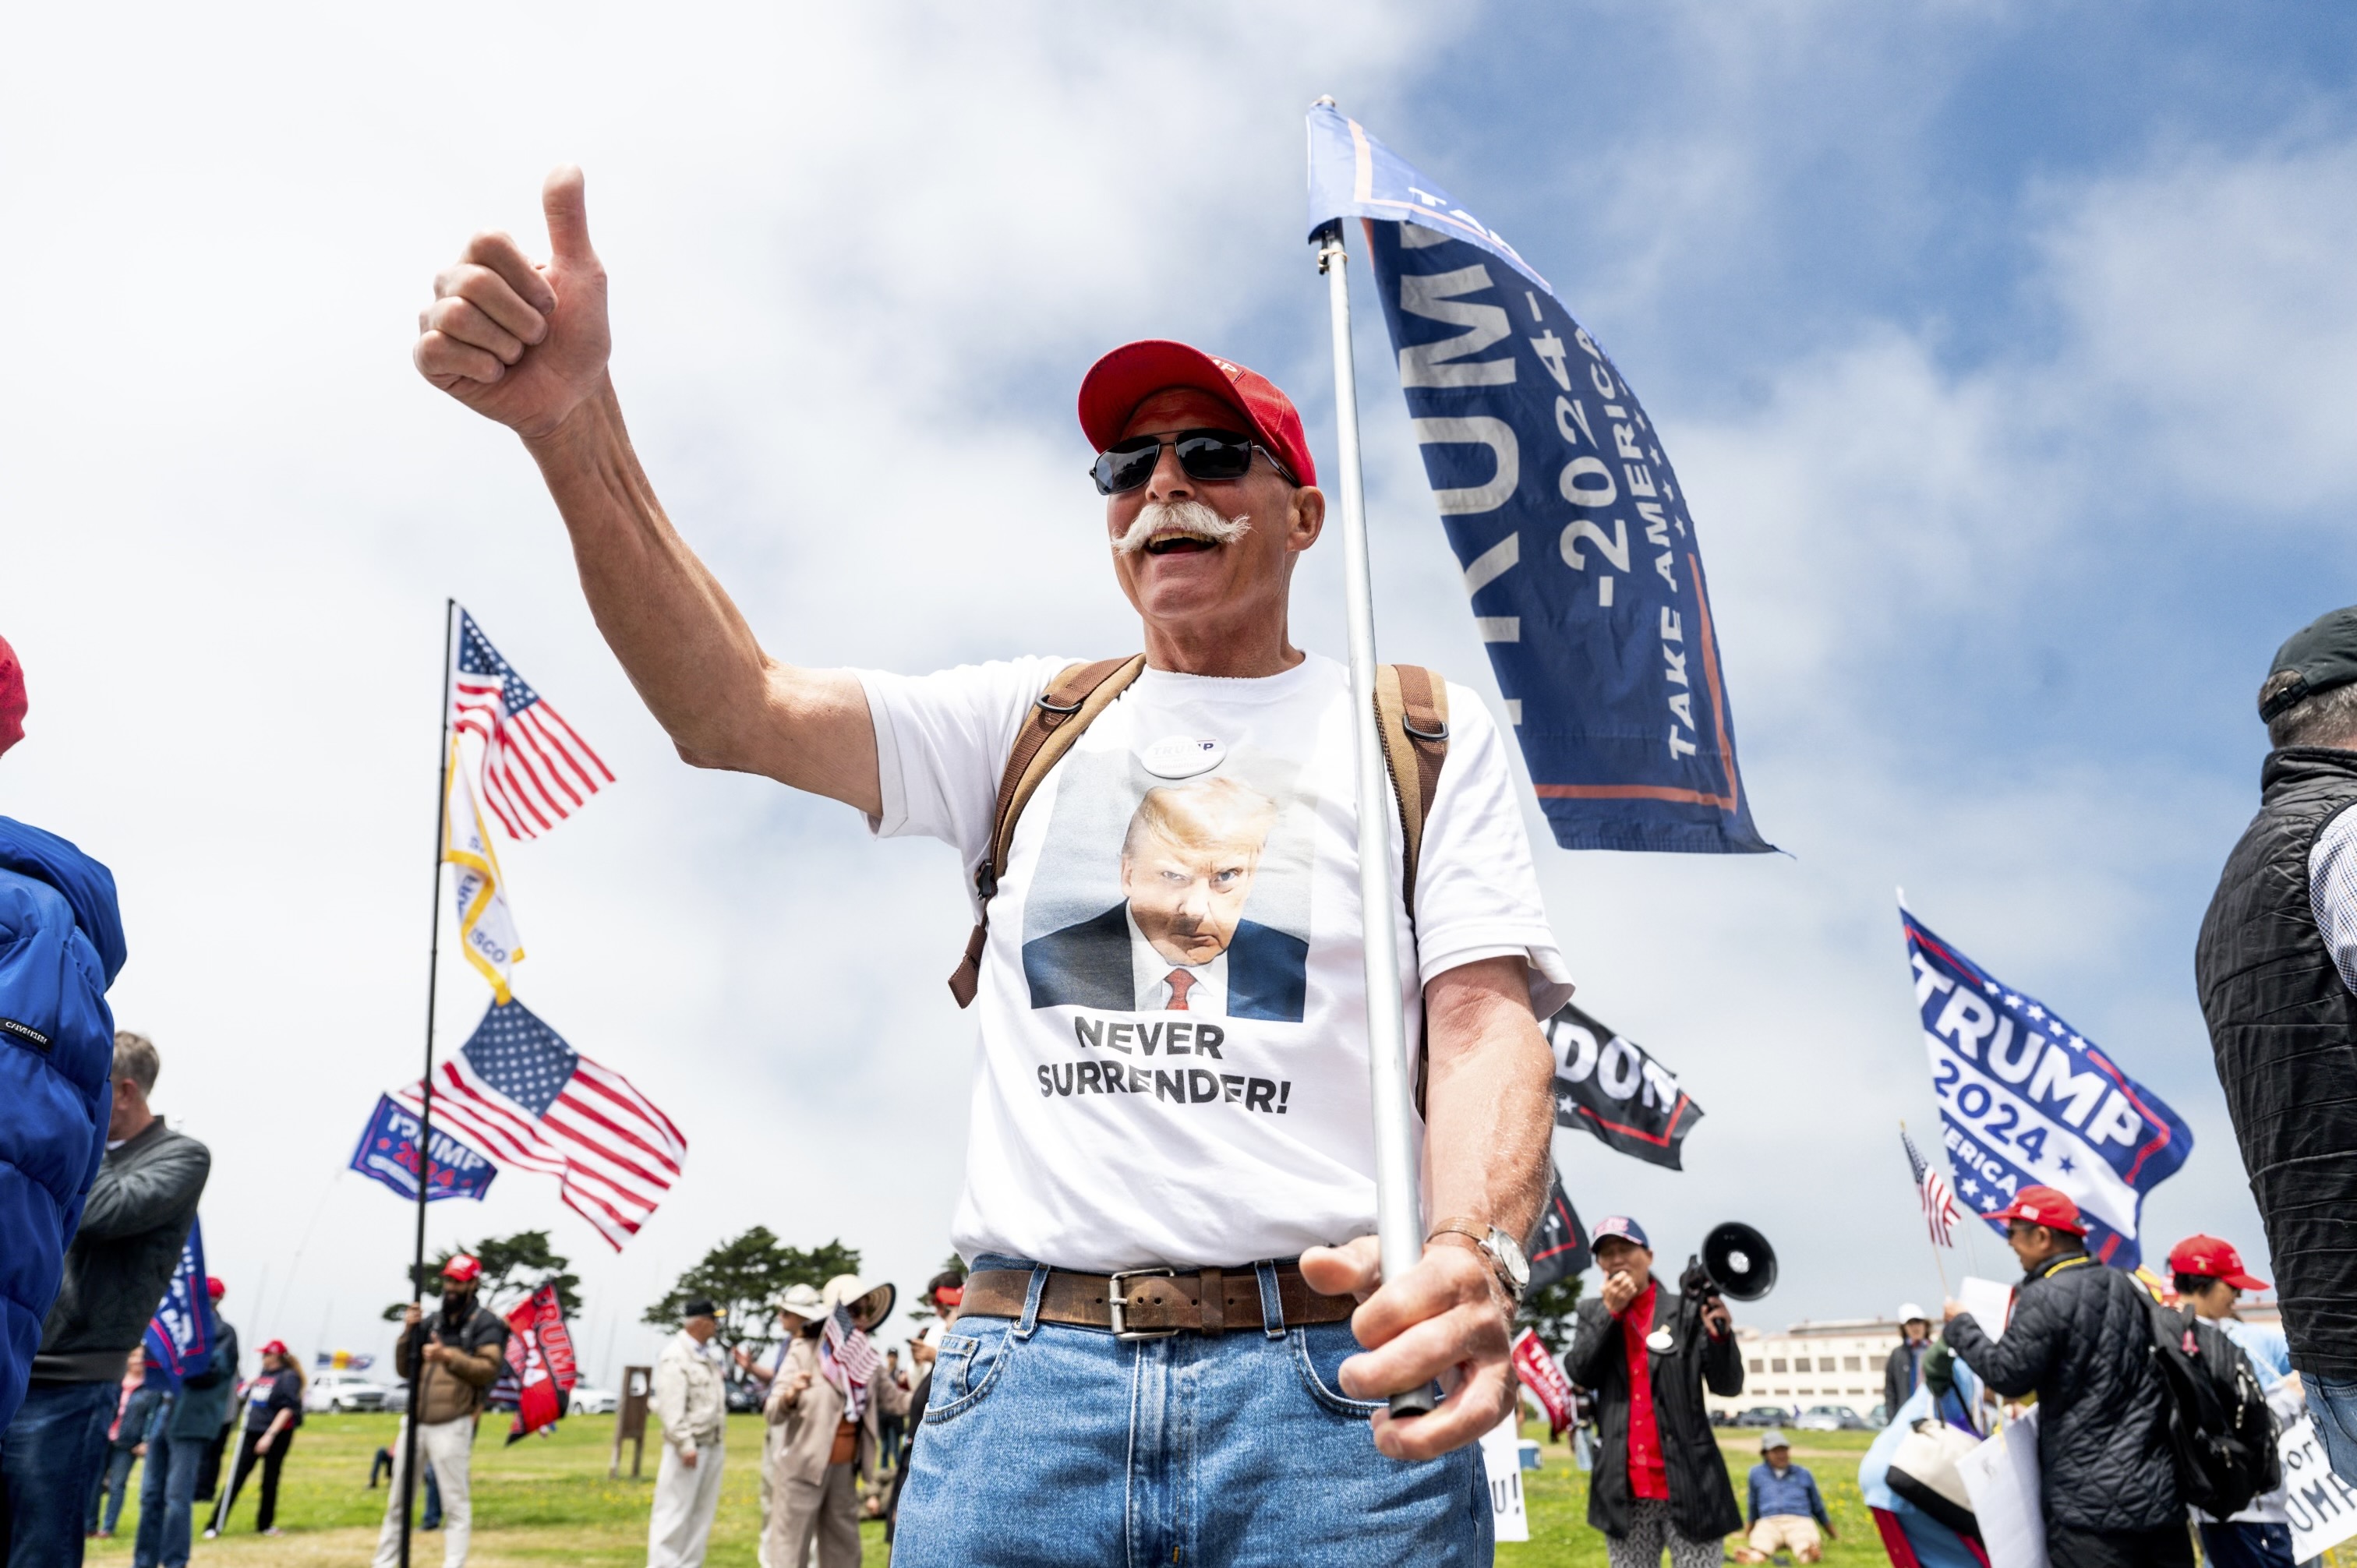 A man wearing a Trump-themed shirt and hat holds a &quot;Trump 2024&quot; flag, giving a thumbs-up in a crowd at an outdoor rally with American and Trump flags in the background.